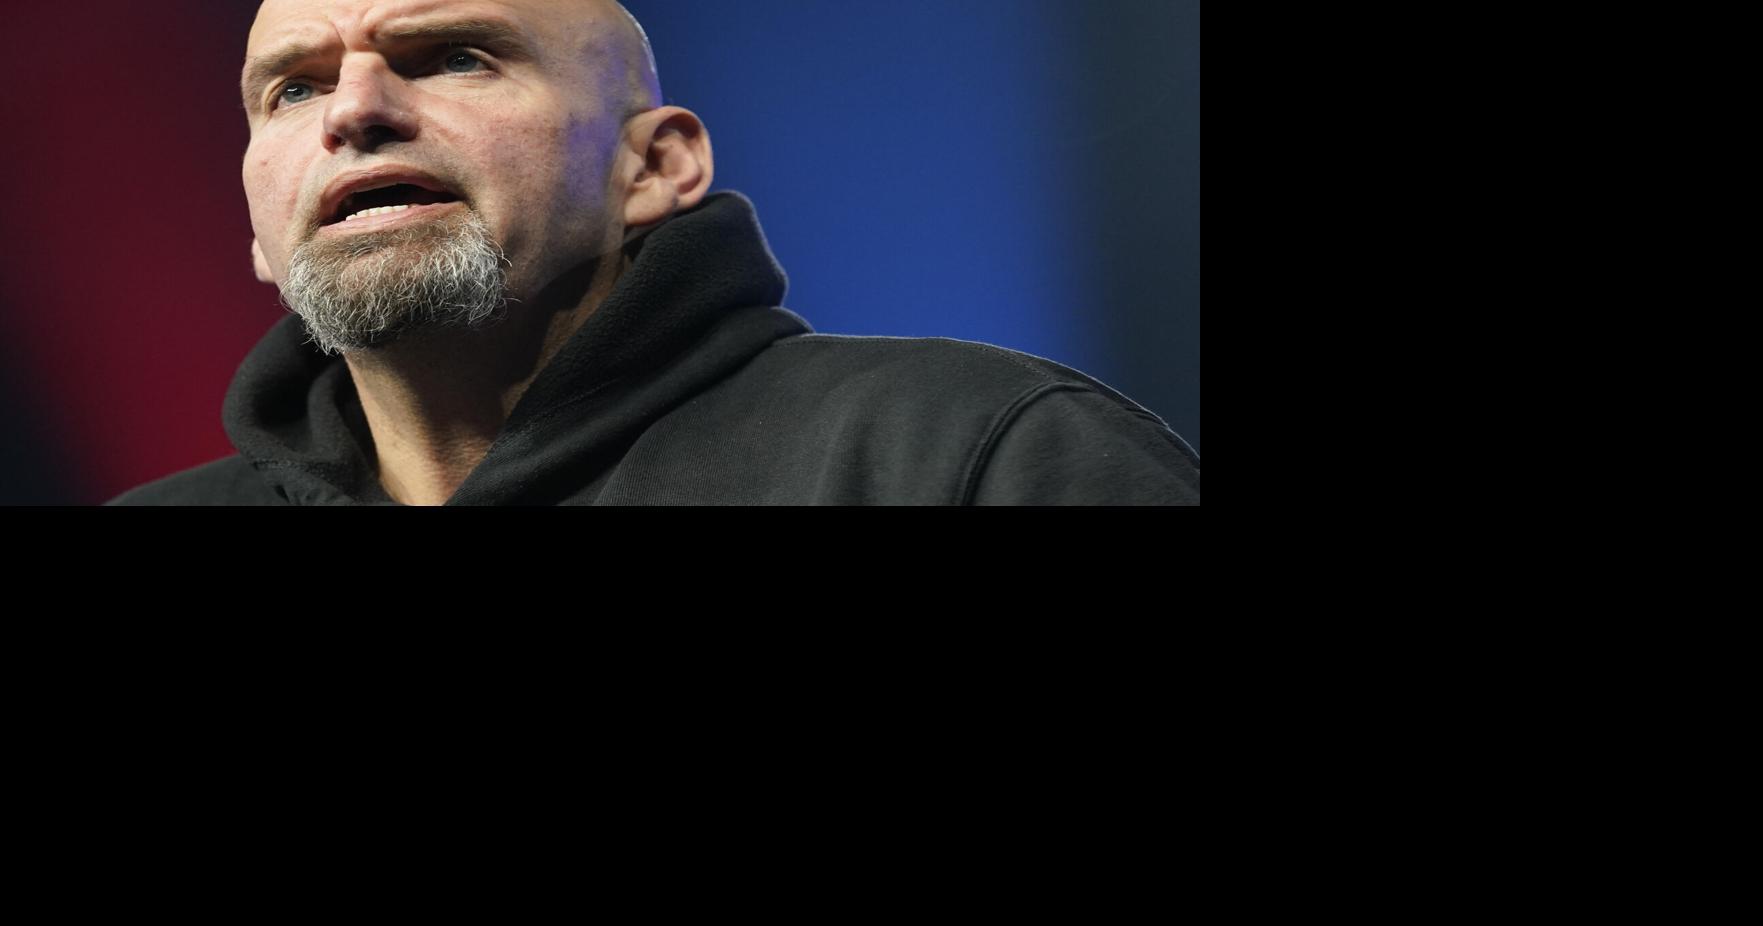 Sen. John Fetterman was at fault in car accident and seen going ‘high rate of speed,’ police say – SCNow